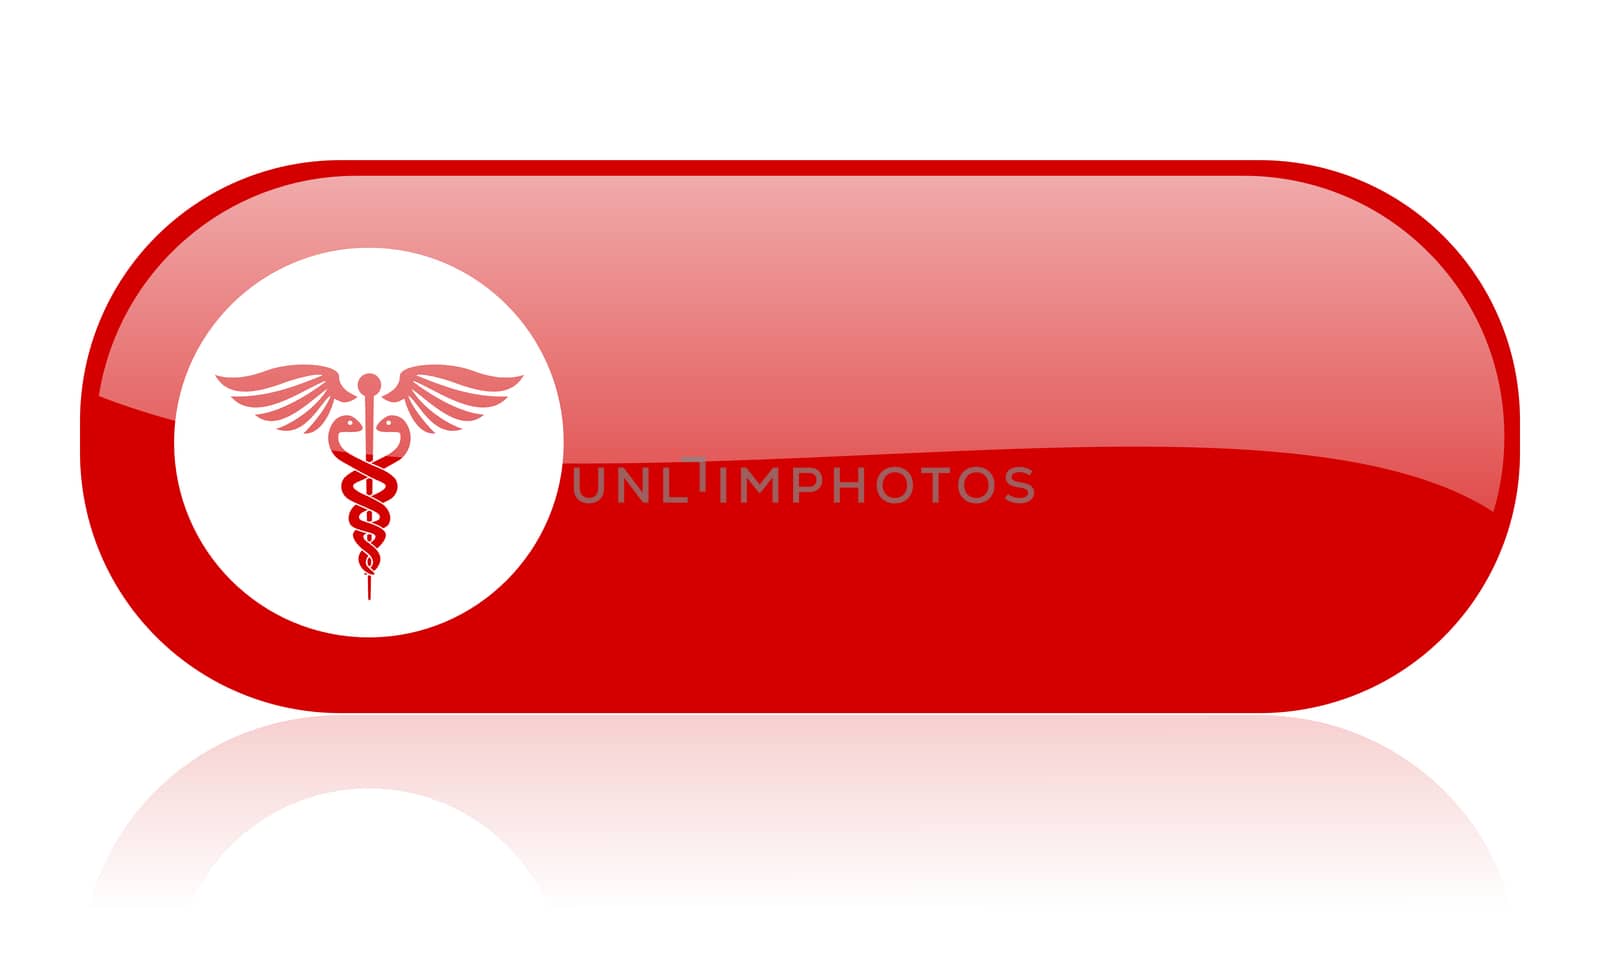 caduceus red web glossy icon by alexwhite